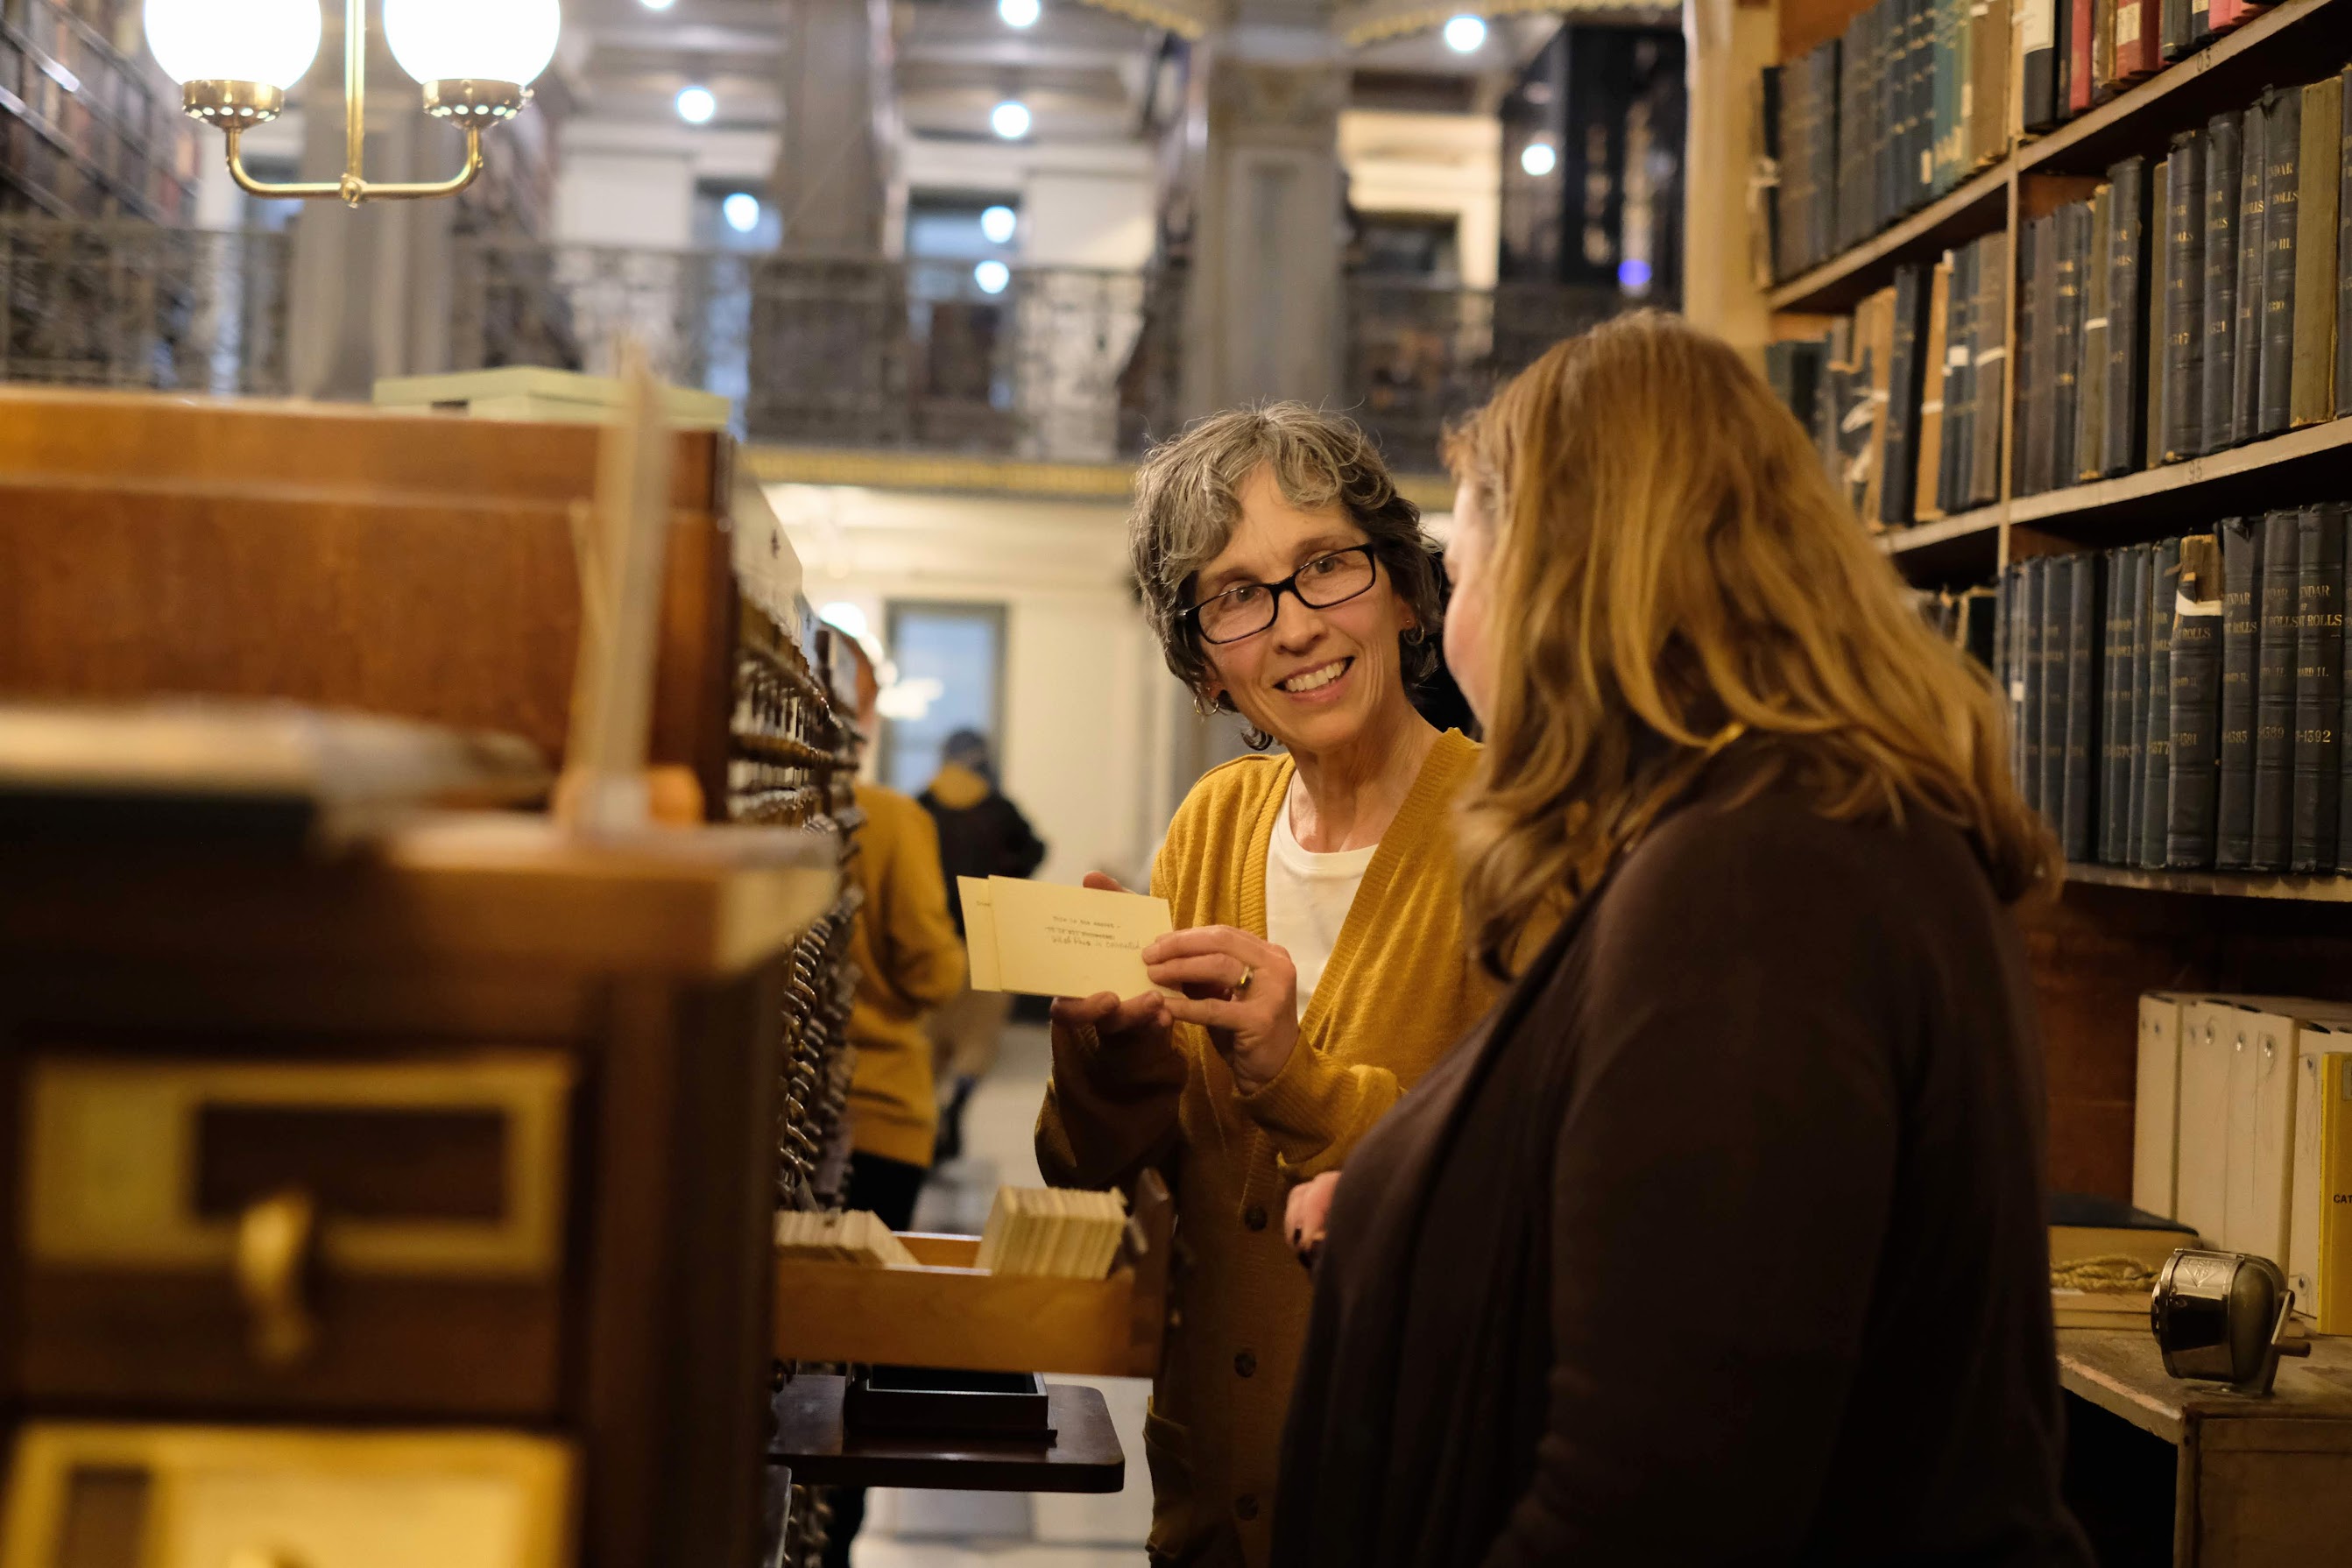 performer Ursula Marcum and audience member at the card catalog in "See Also"